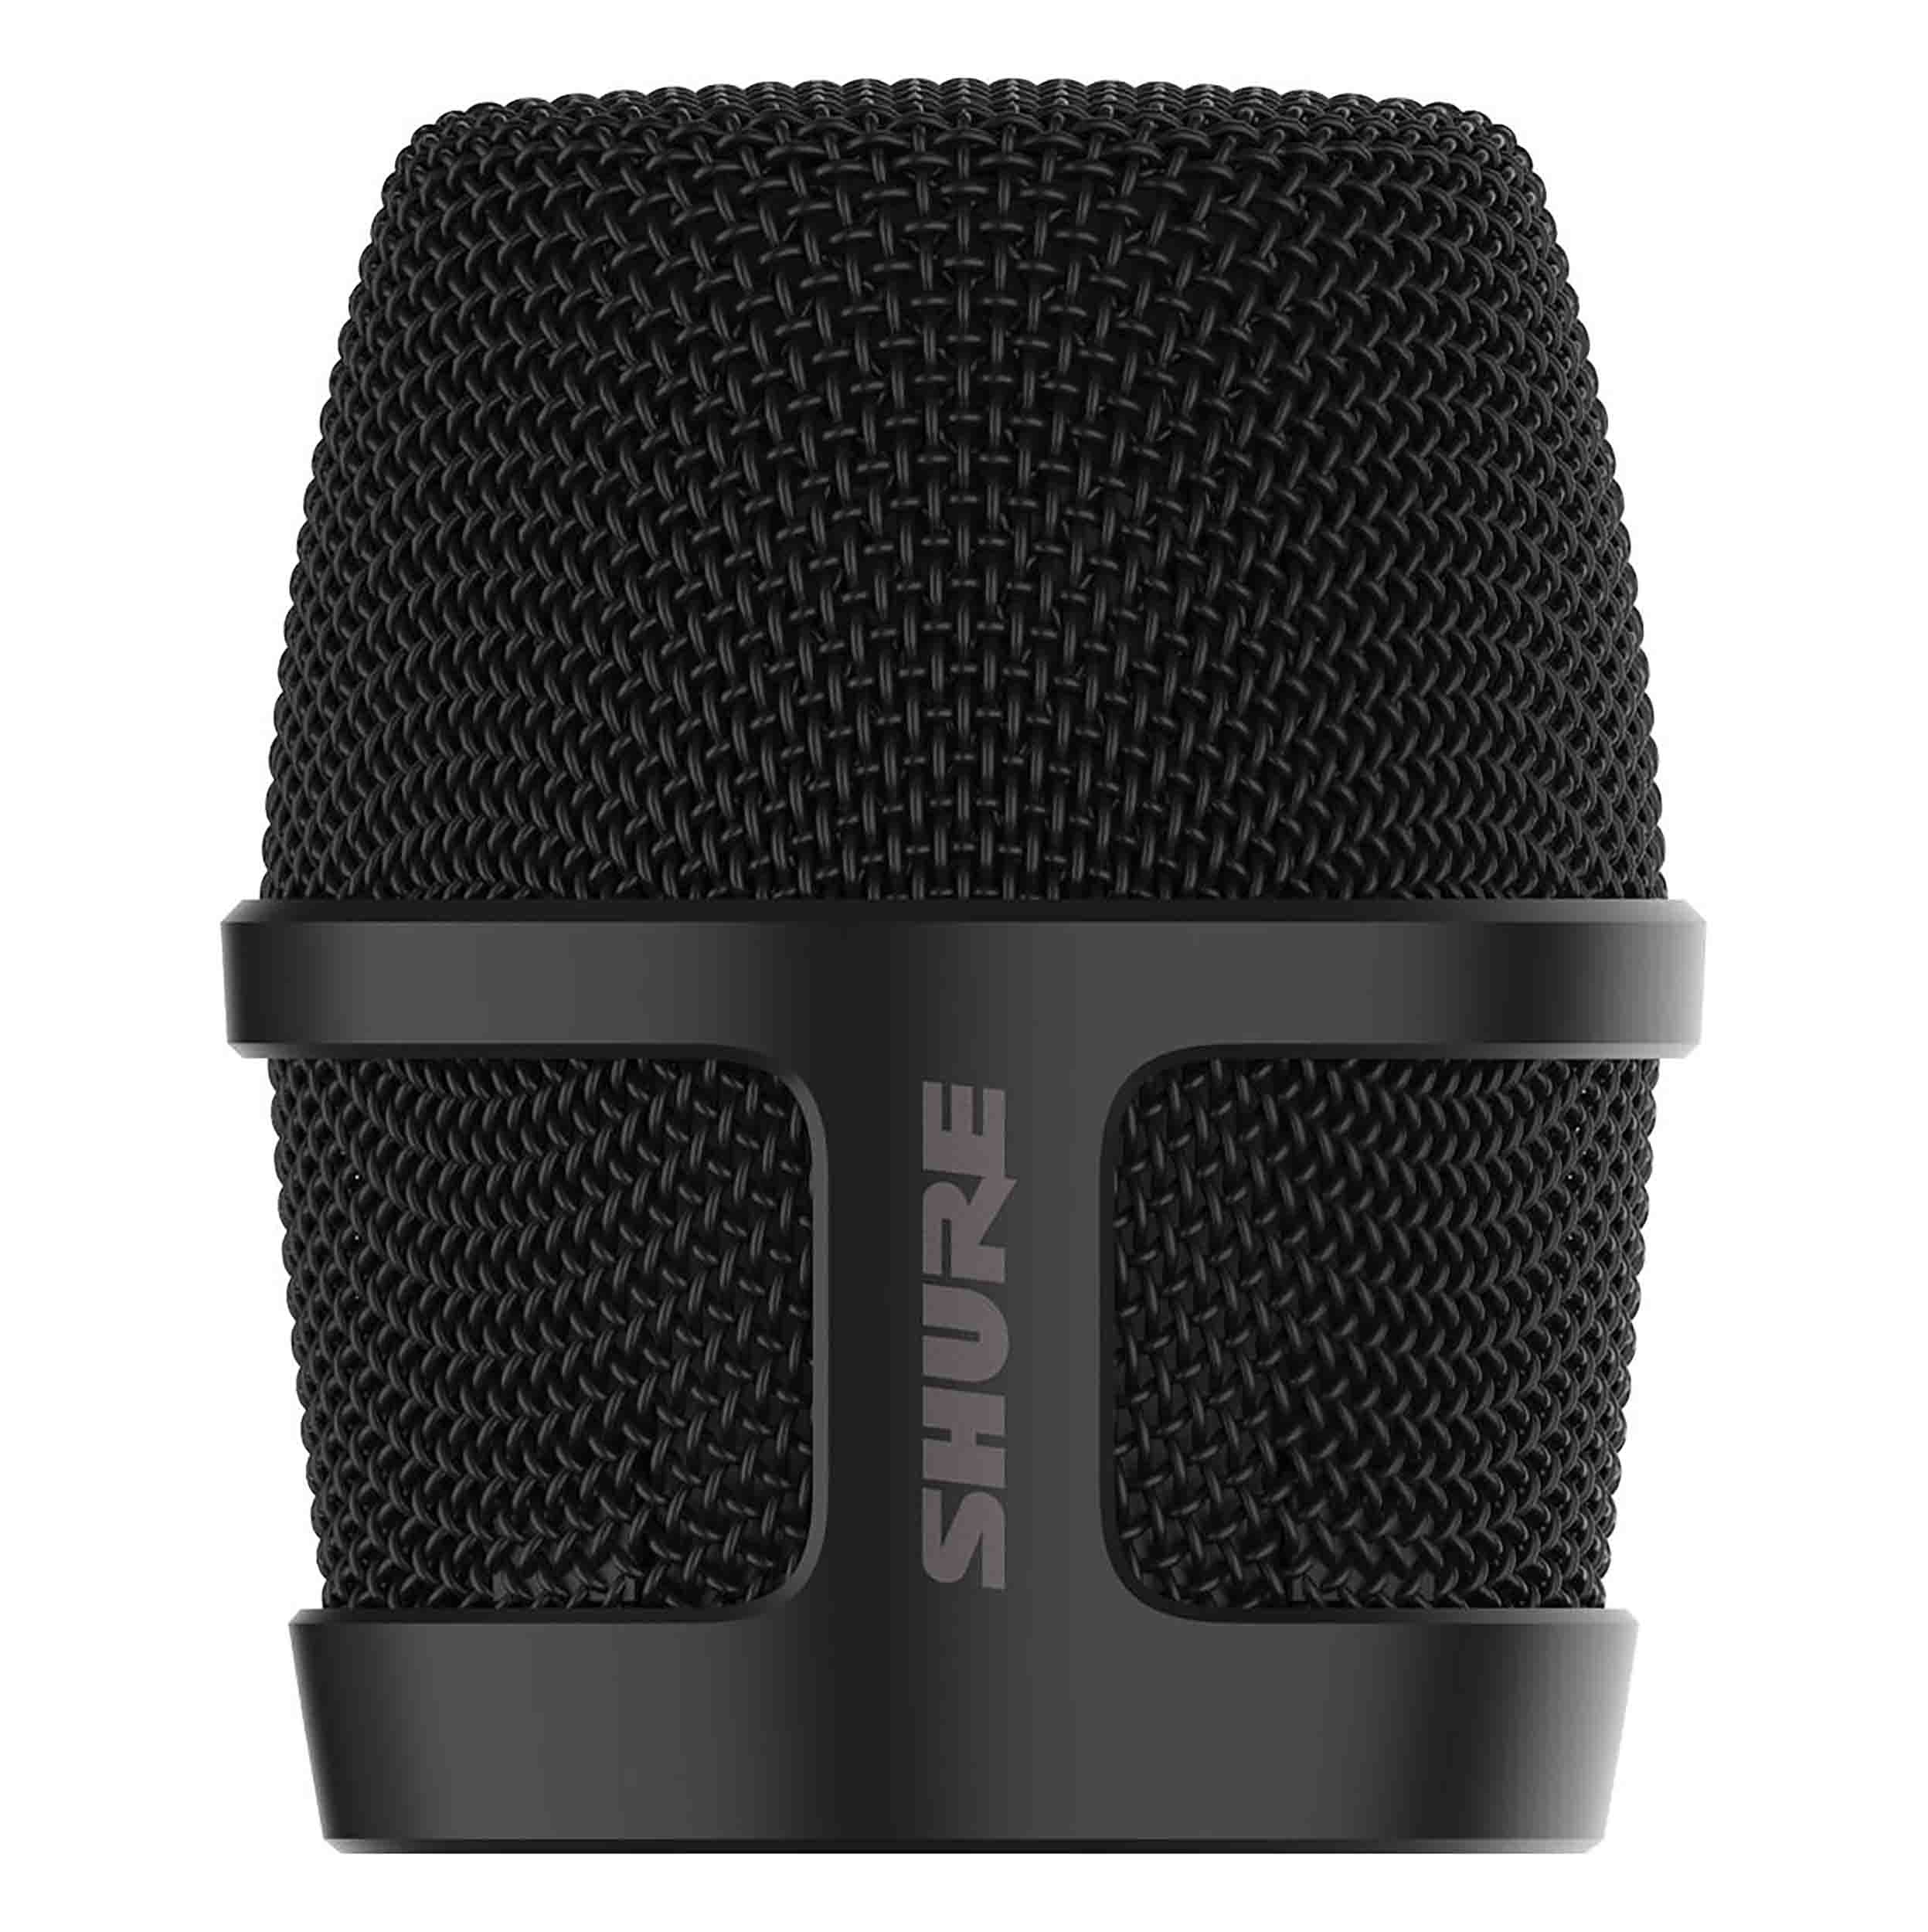 Shure RPM28 Grille for Nexadyne 8/C Cardioid Microphone by Shure